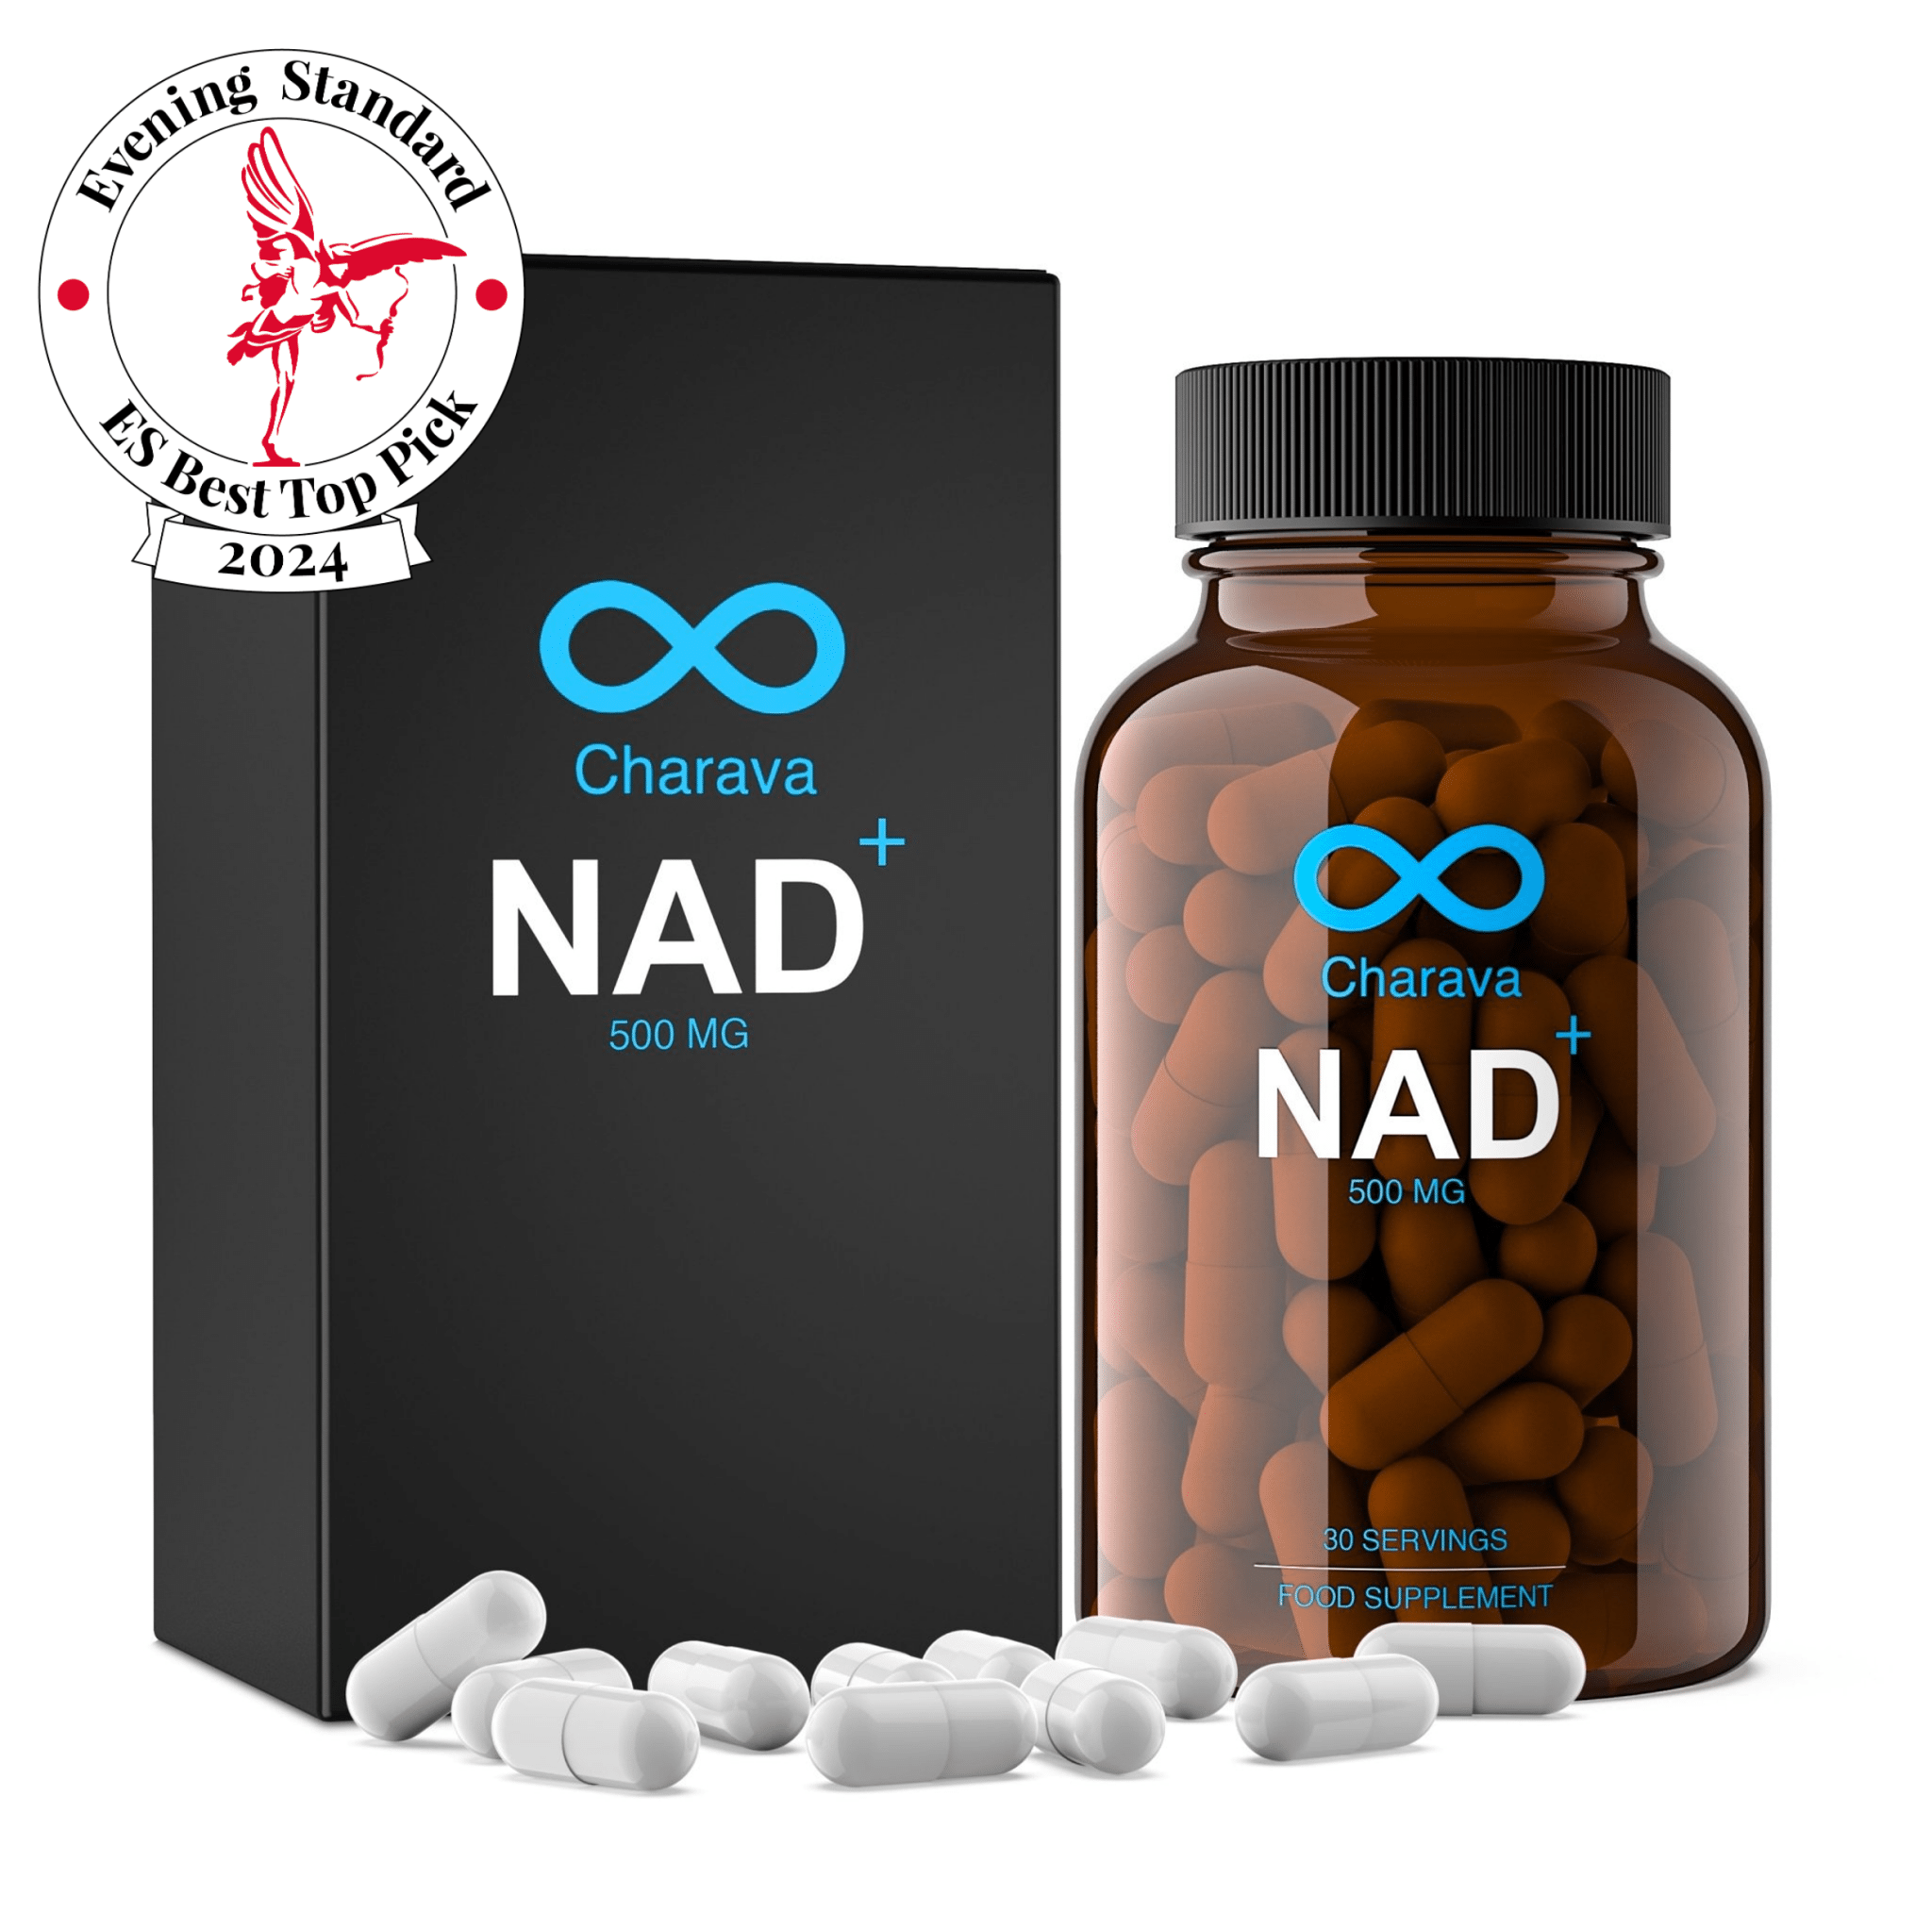 Nad Plus Supplement , NAD+ 500mg